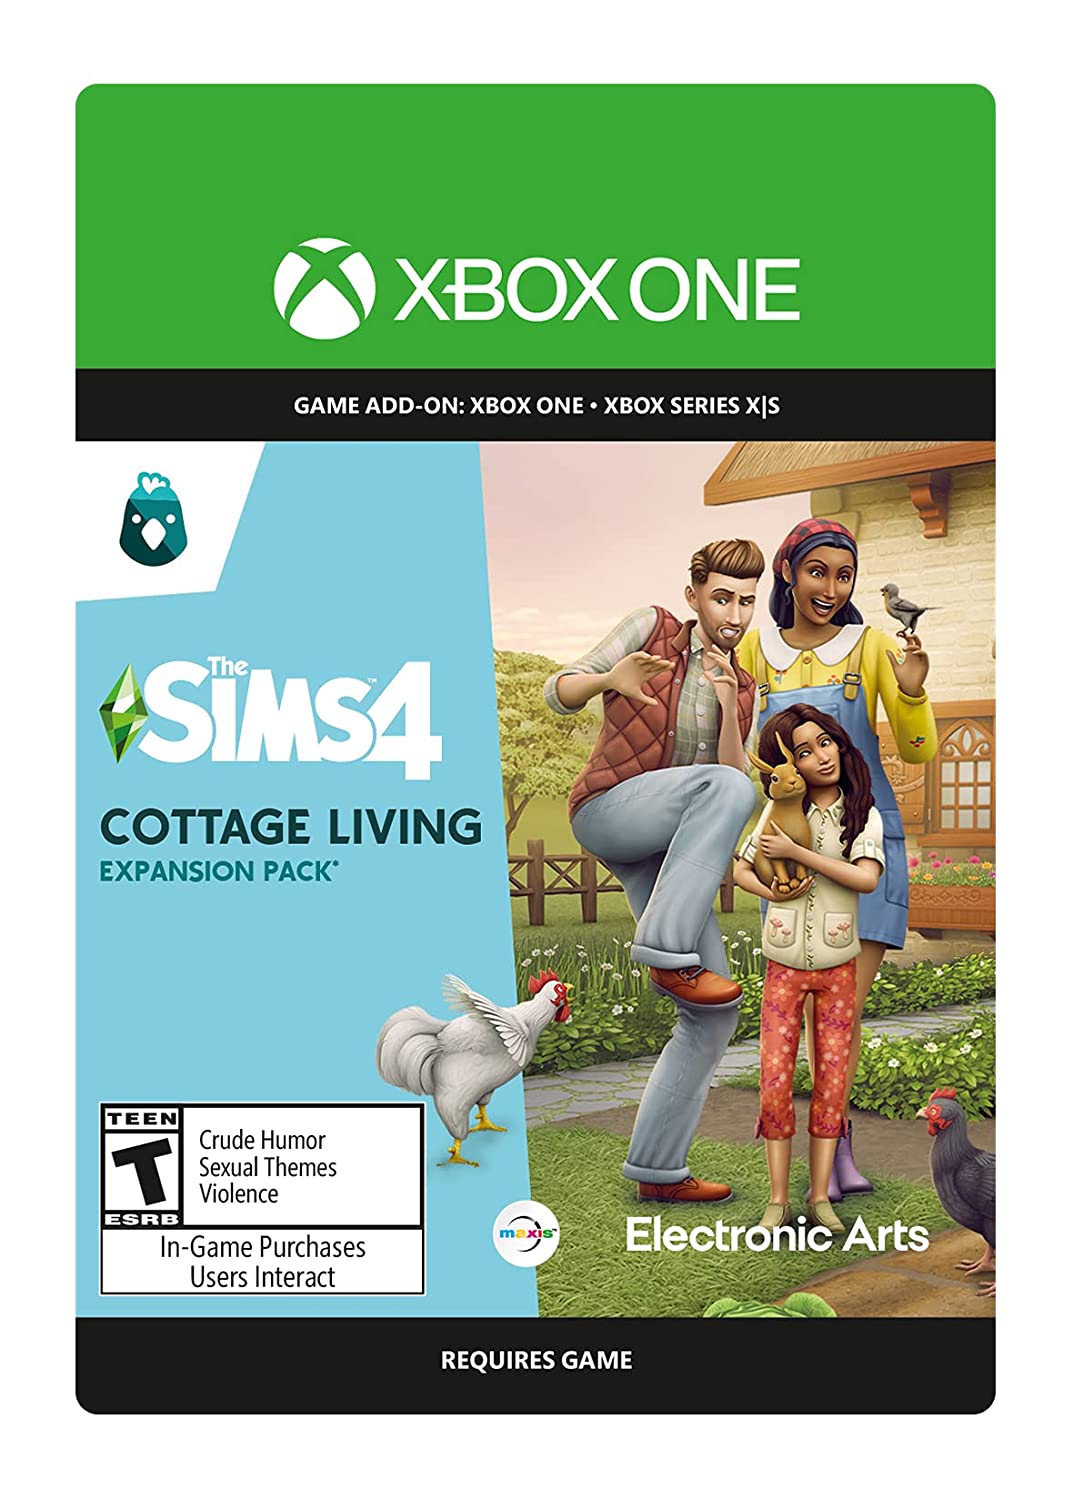 The Sims 4 Cottage Living Digital Download Key (Xbox One): United Kingdom - 